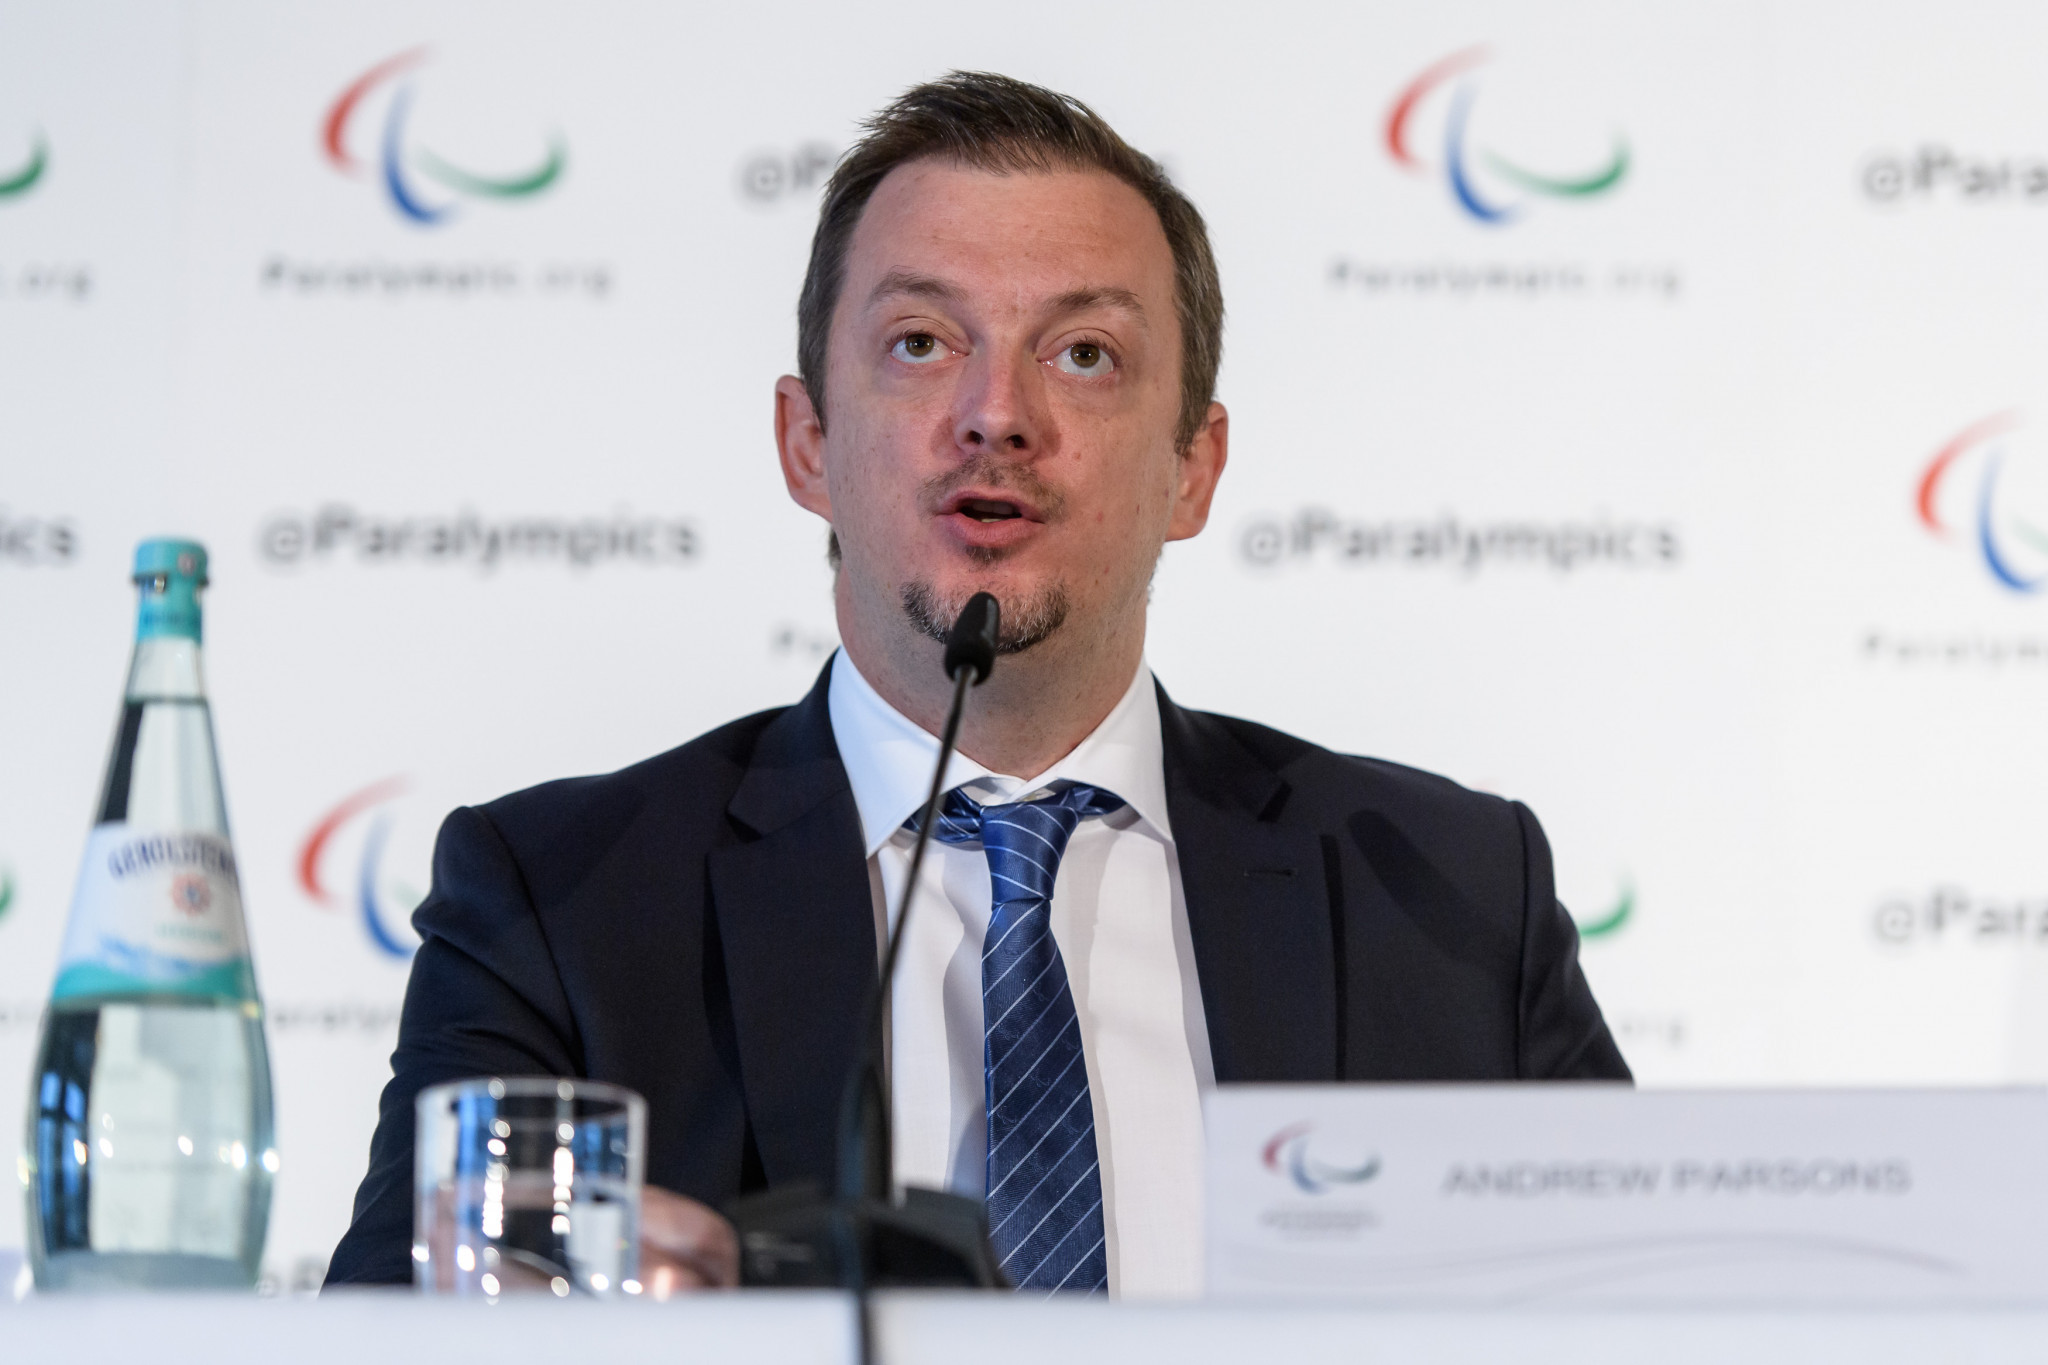 Exclusive: IPC President Parsons reveals new approach to head off crisis over accessible hotel rooms during Tokyo 2020 Paralympics